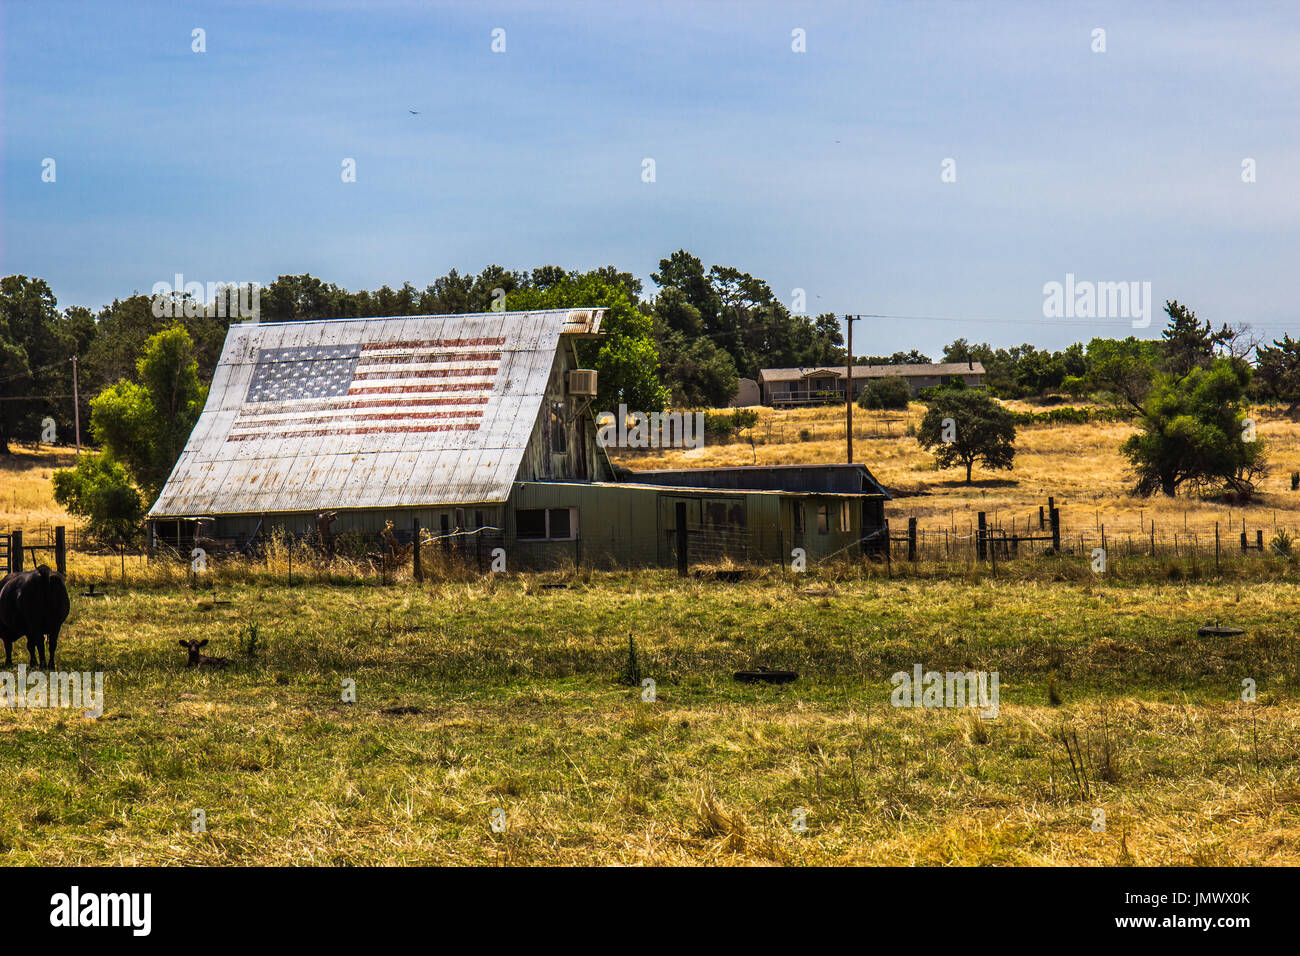 Old Wooden Barn With American Flag On Tin Roof Stock Photo